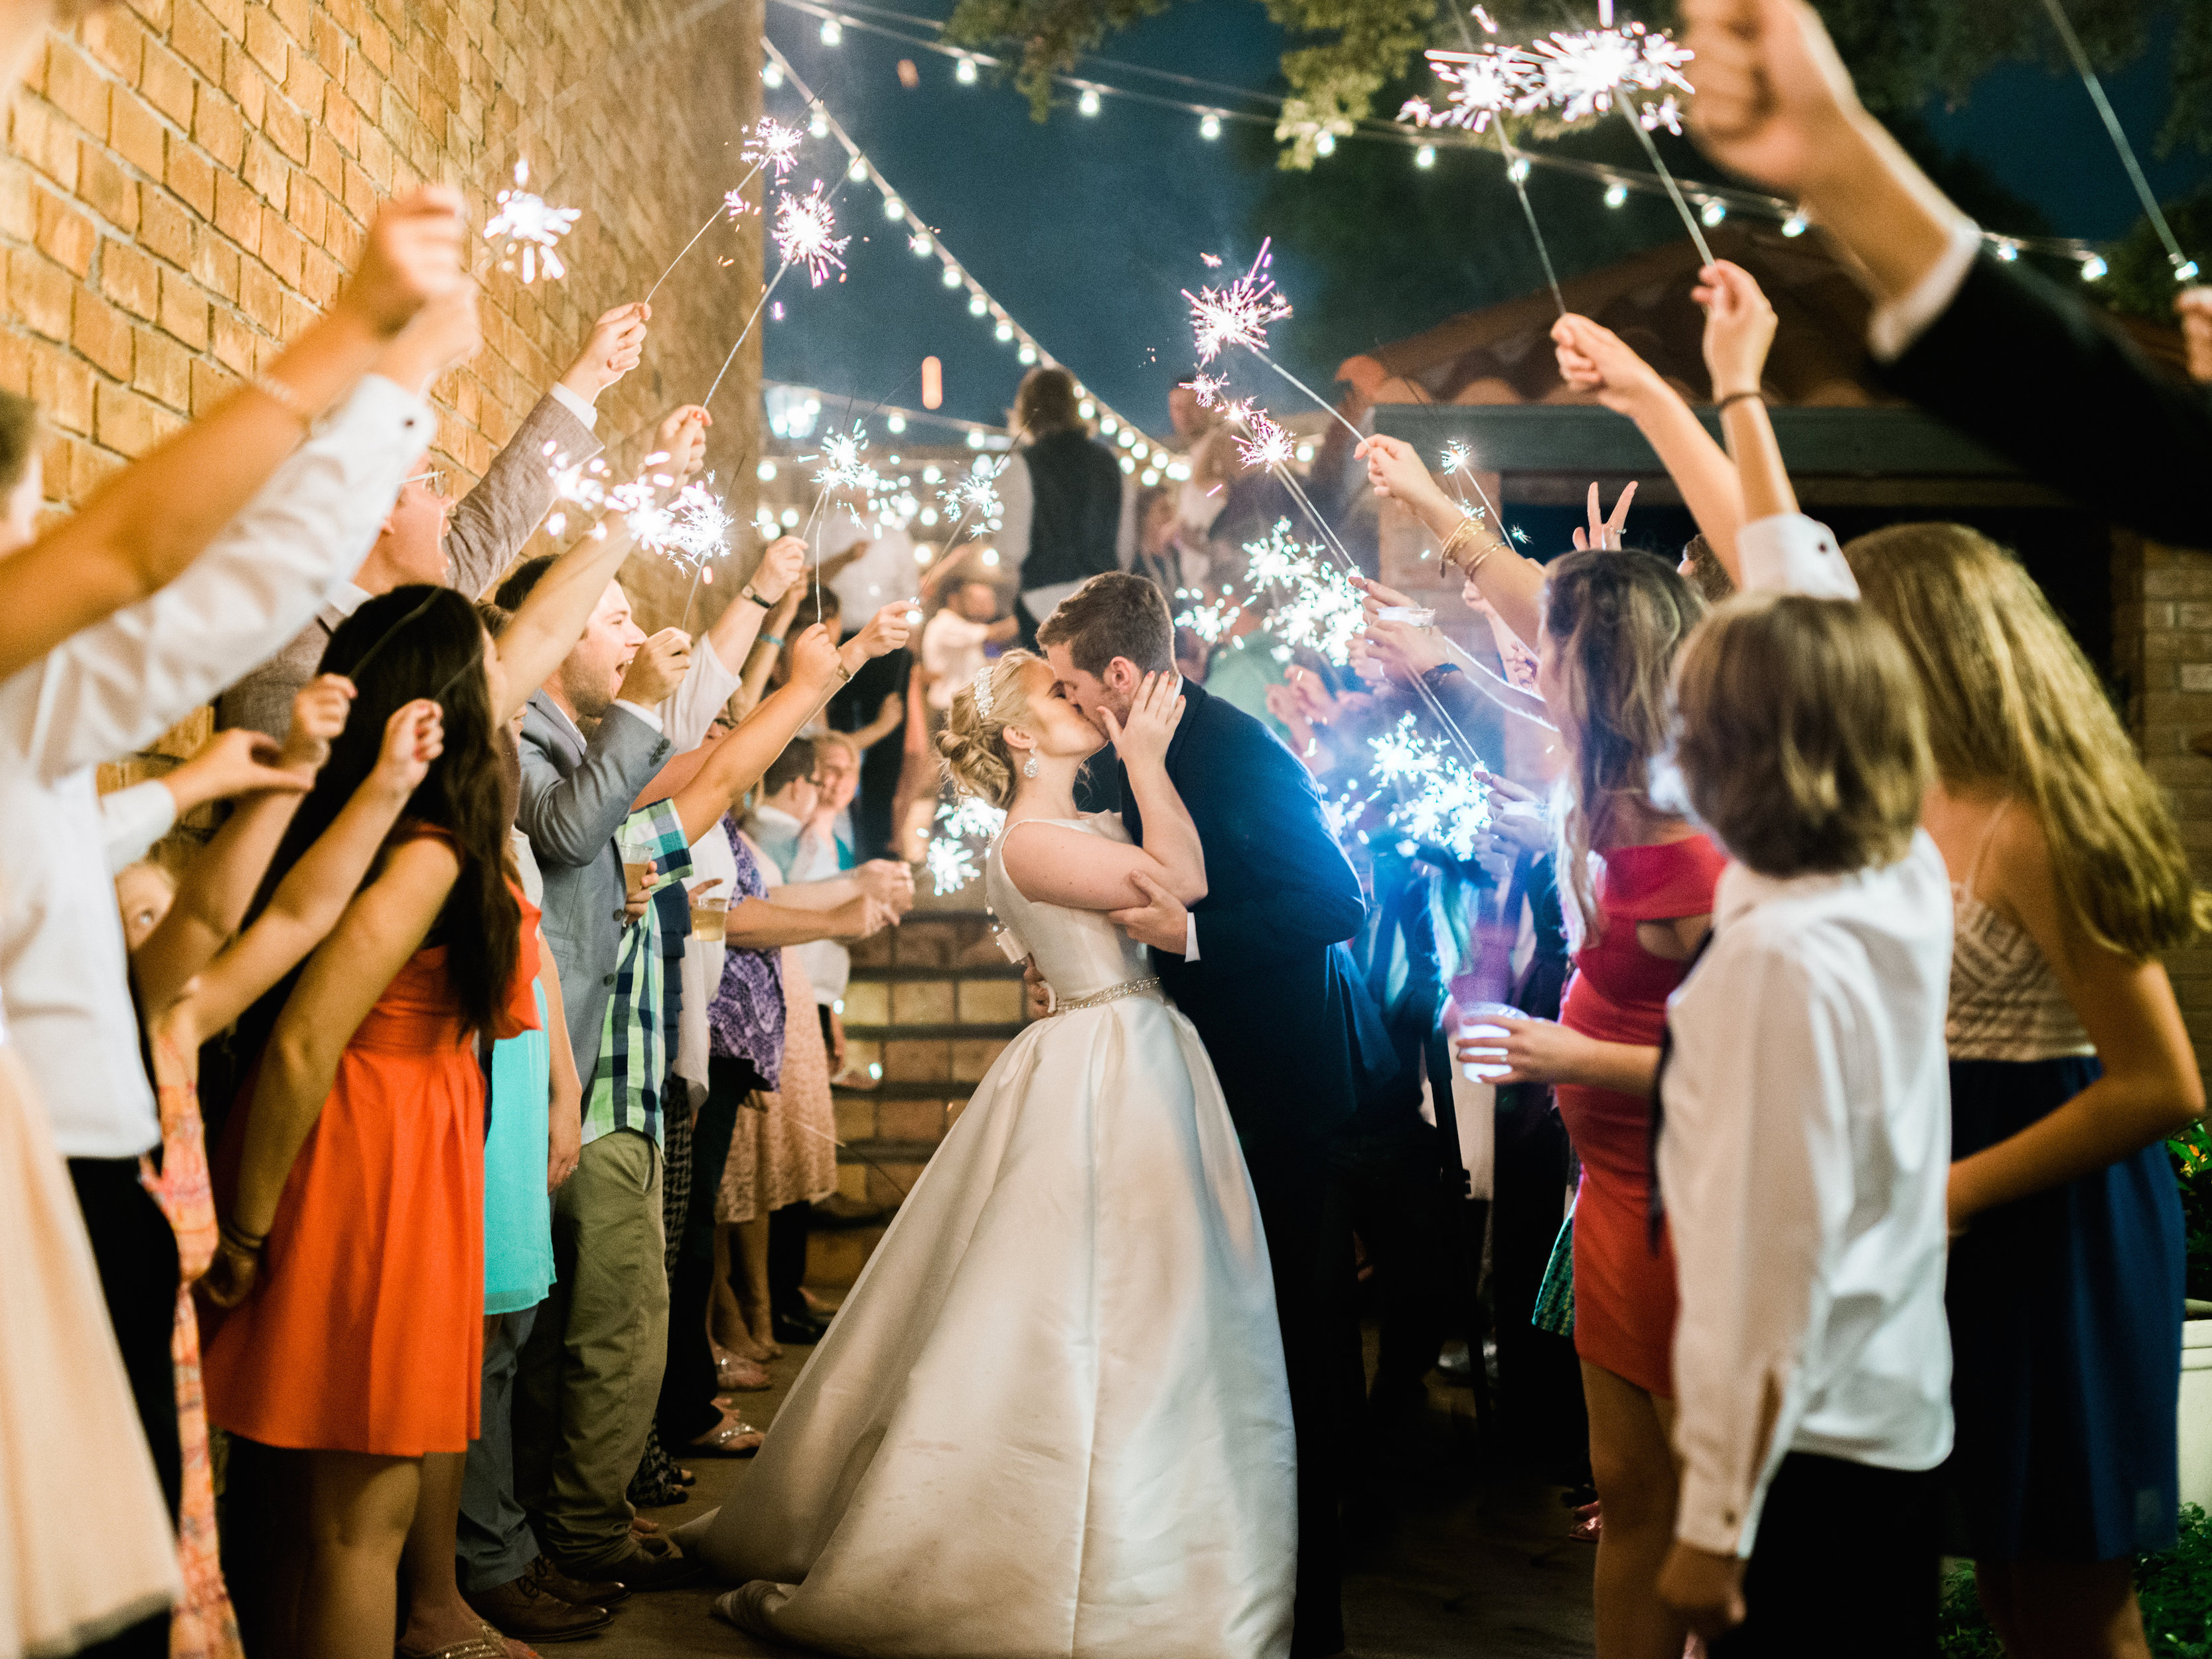 View More: http://cottonwoodroadphotography.pass.us/bayleighandphilip